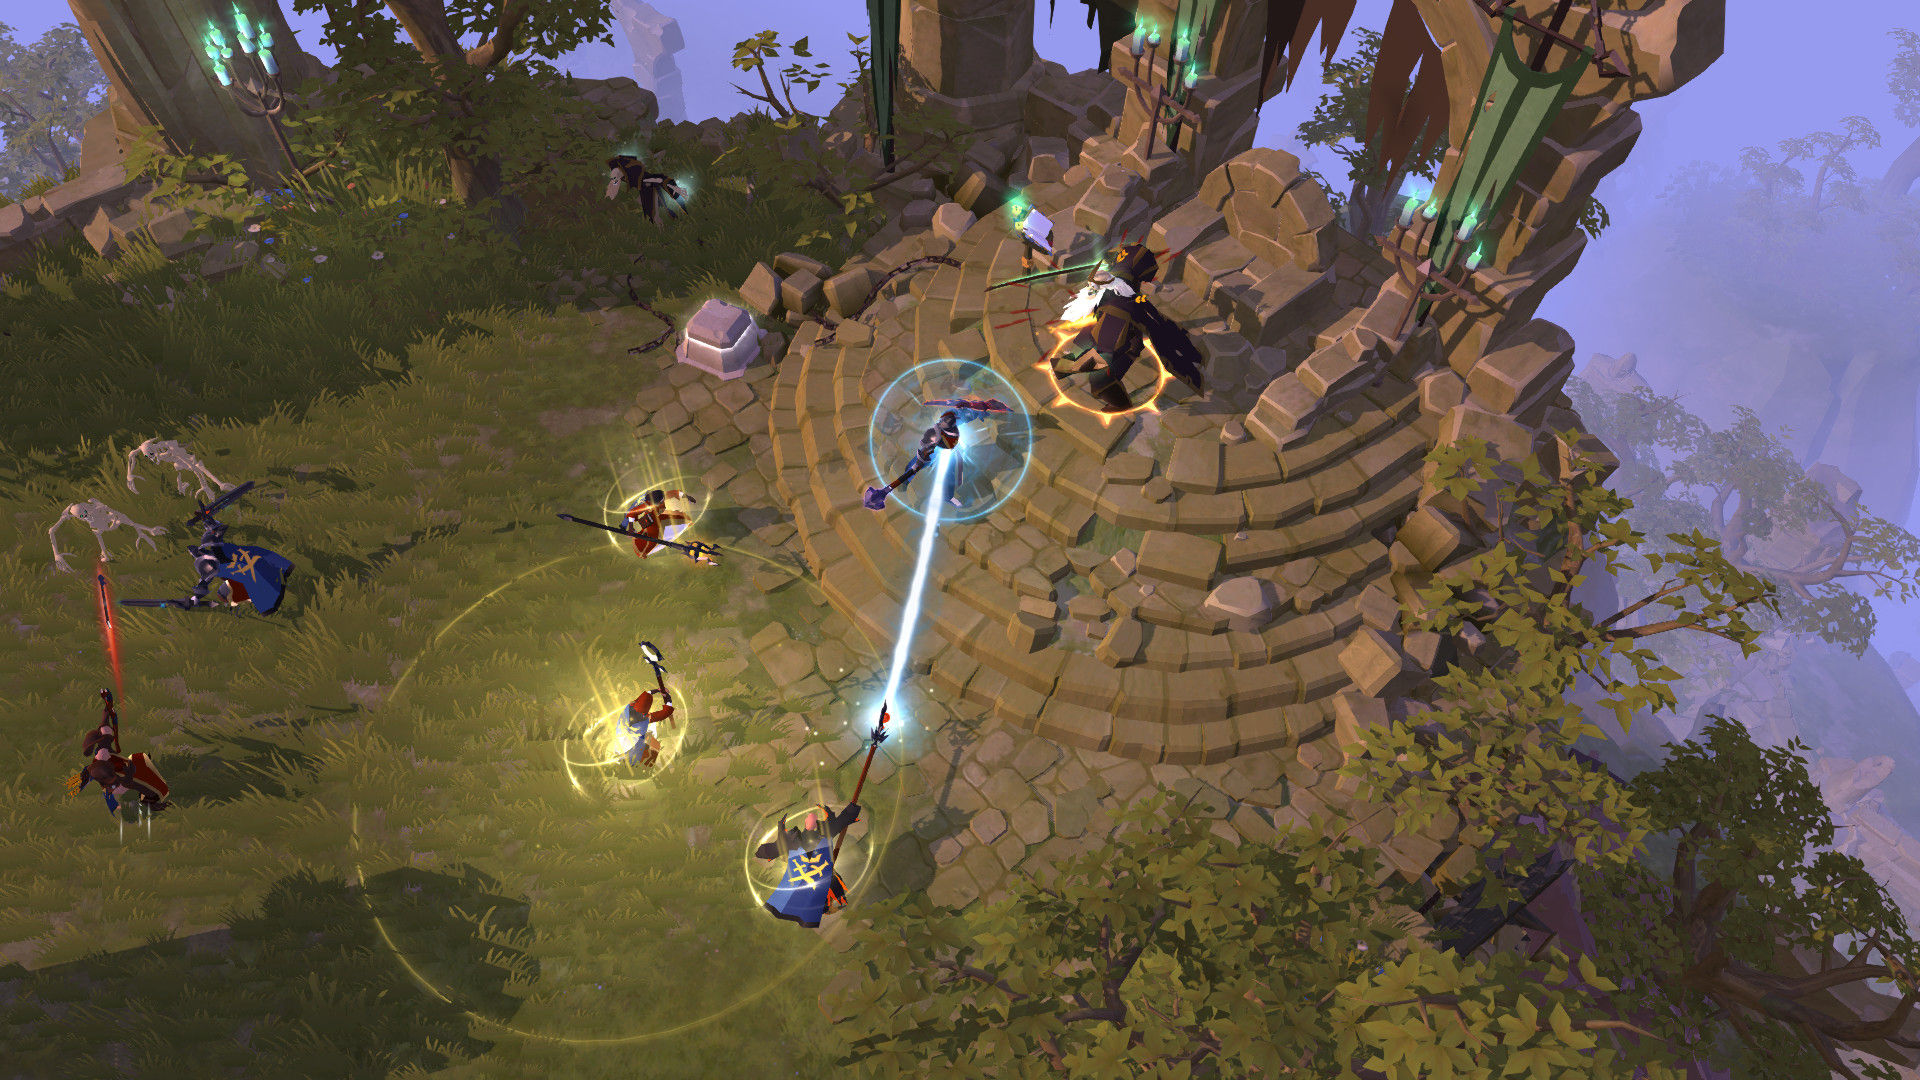 Best MMORPGs: Albion Online. Image shows a magical battle taking place on an alter-like structure.